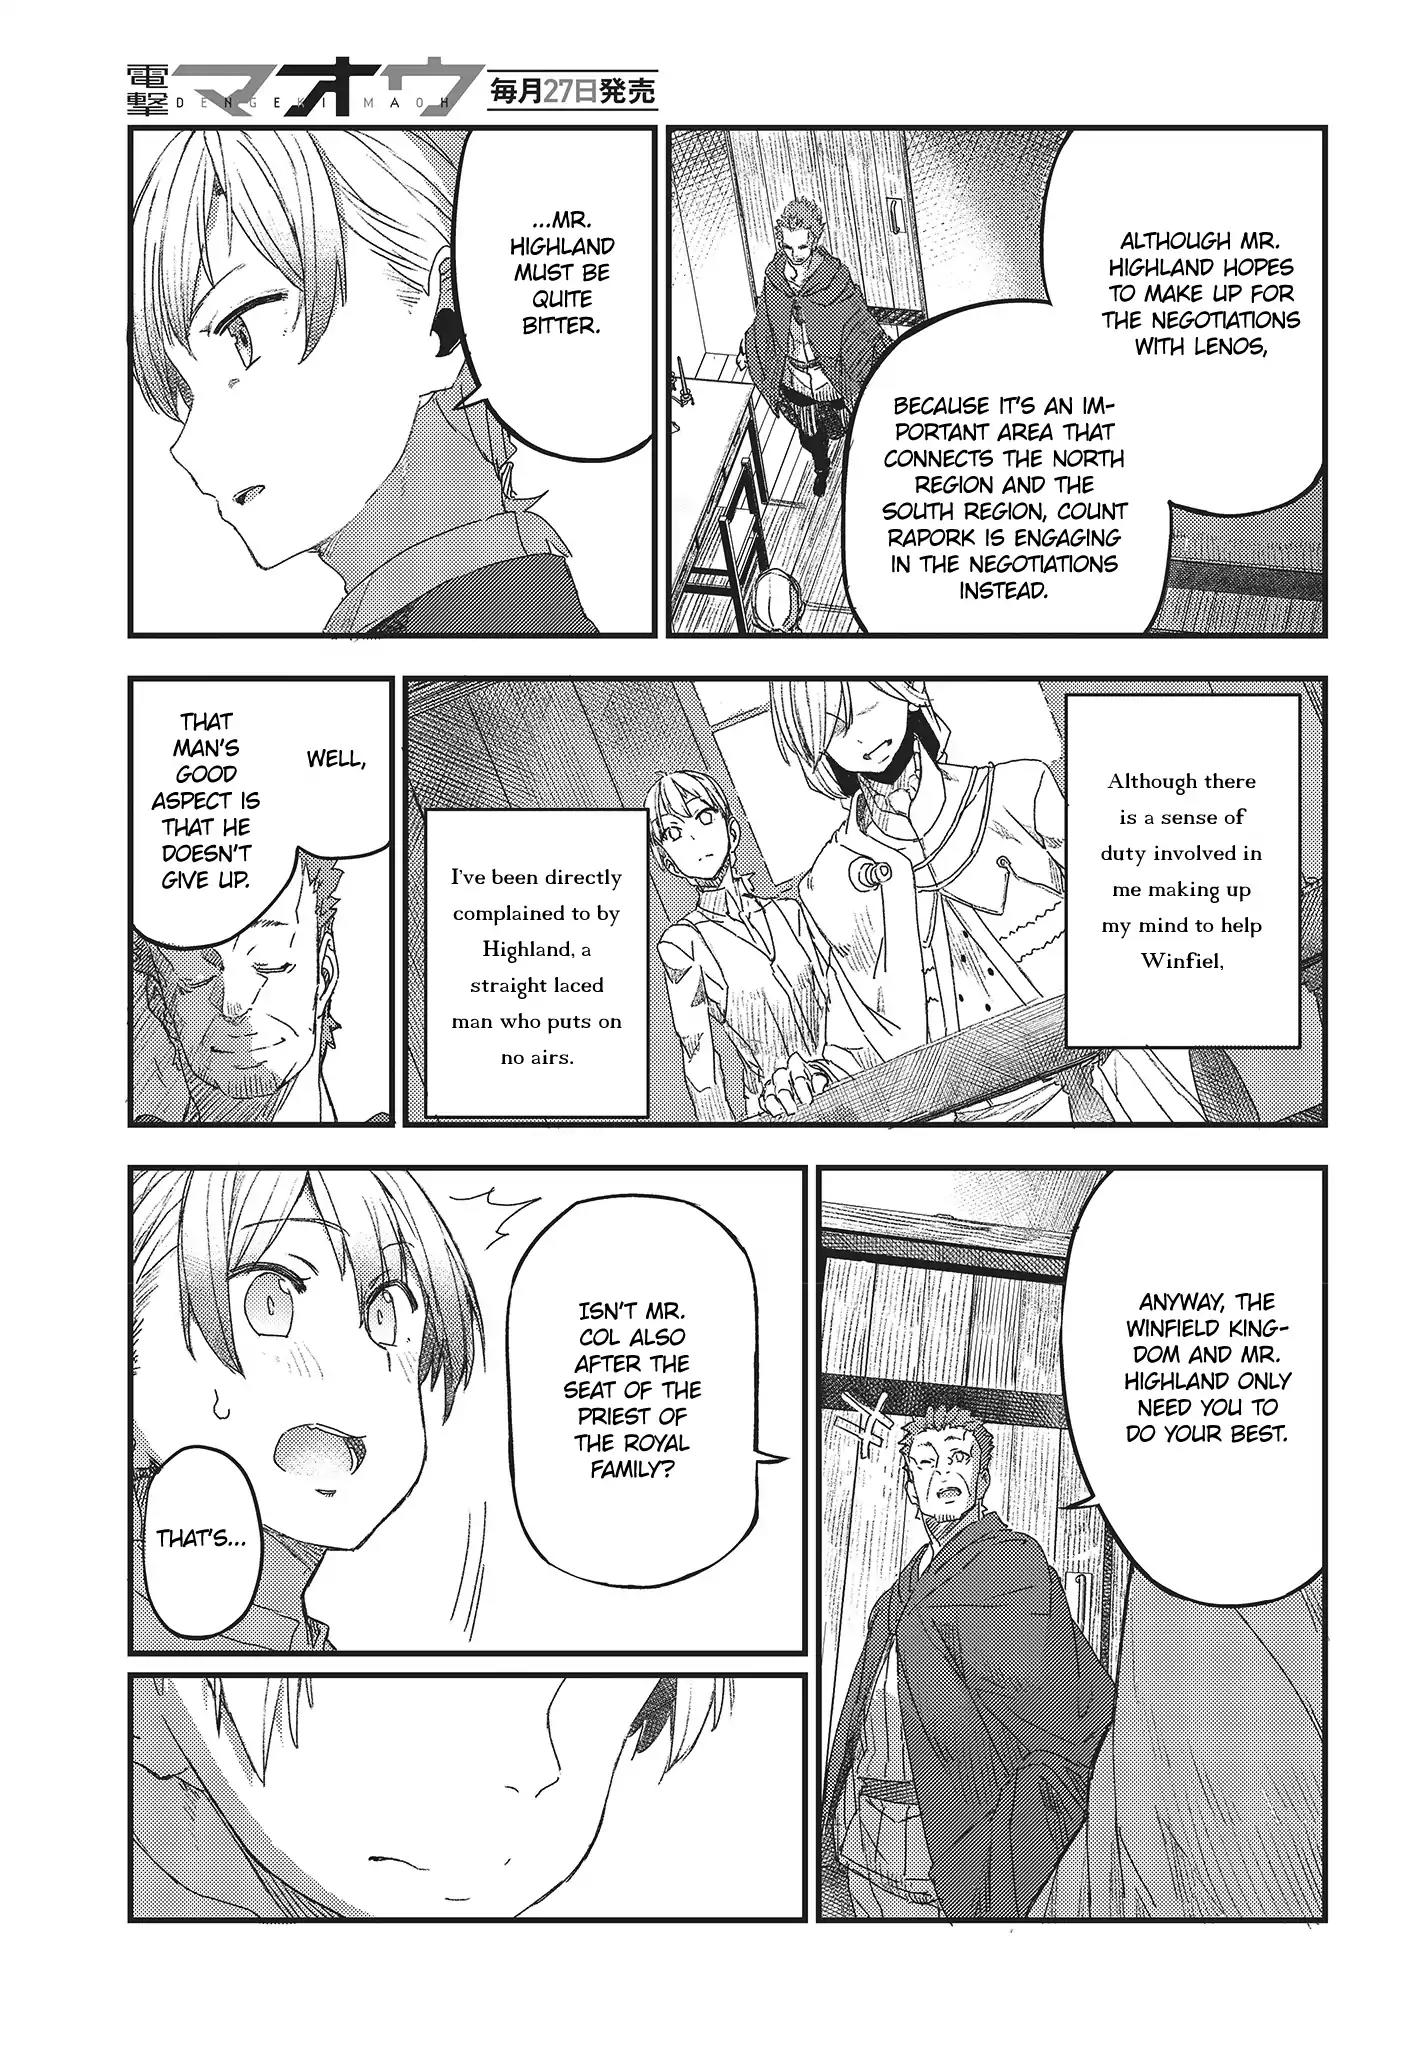 Wolf & Parchment: New Theory Spice & Wolf Vol.1 Chapter 2